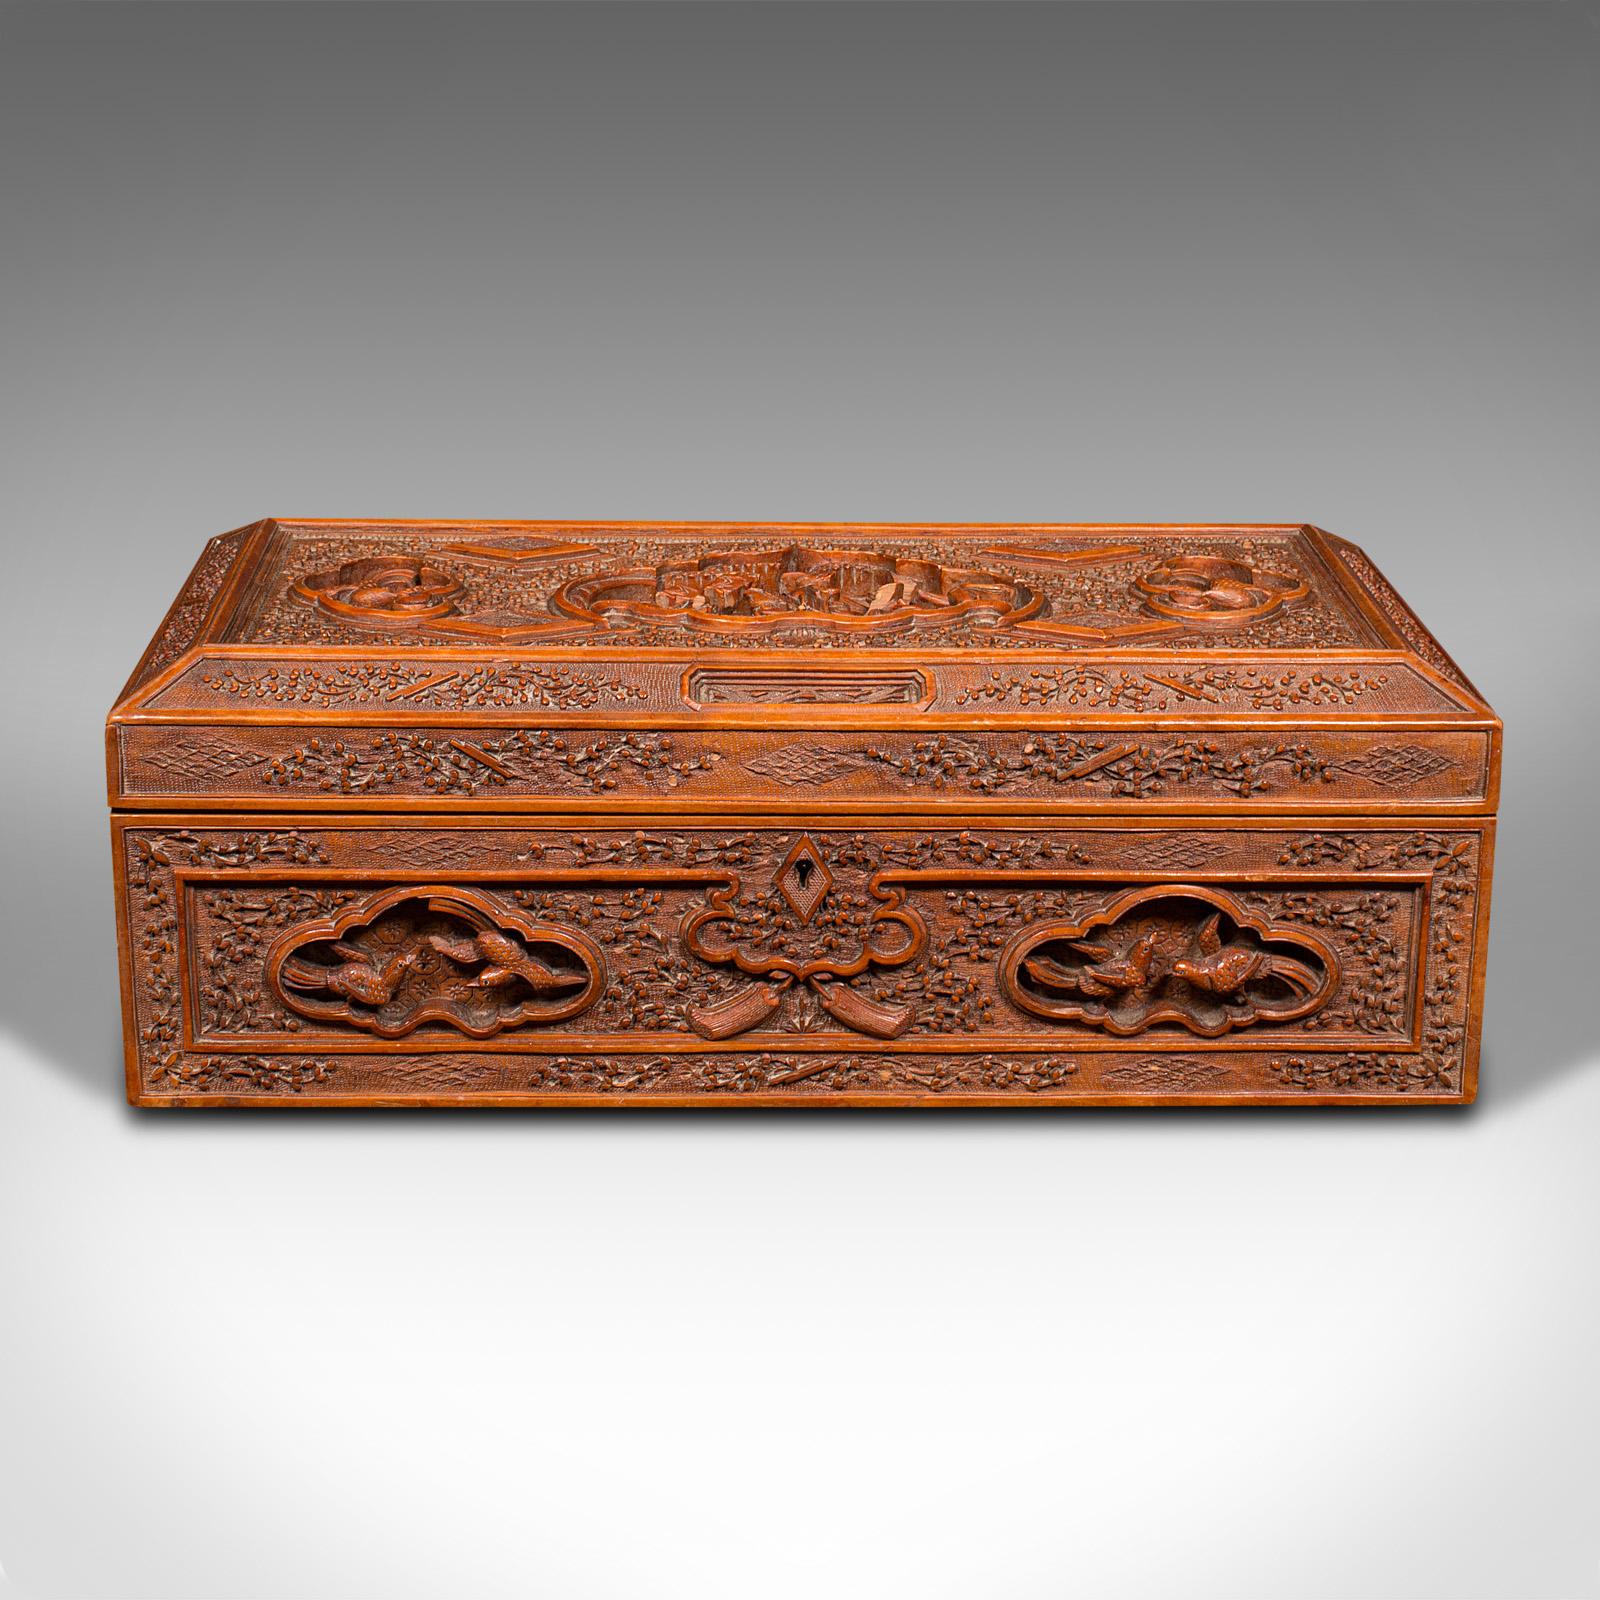 Chinoiserie Vintage Carved Keepsake Case, Chinese, Satinwood, Decorative Box, Circa 1950 For Sale